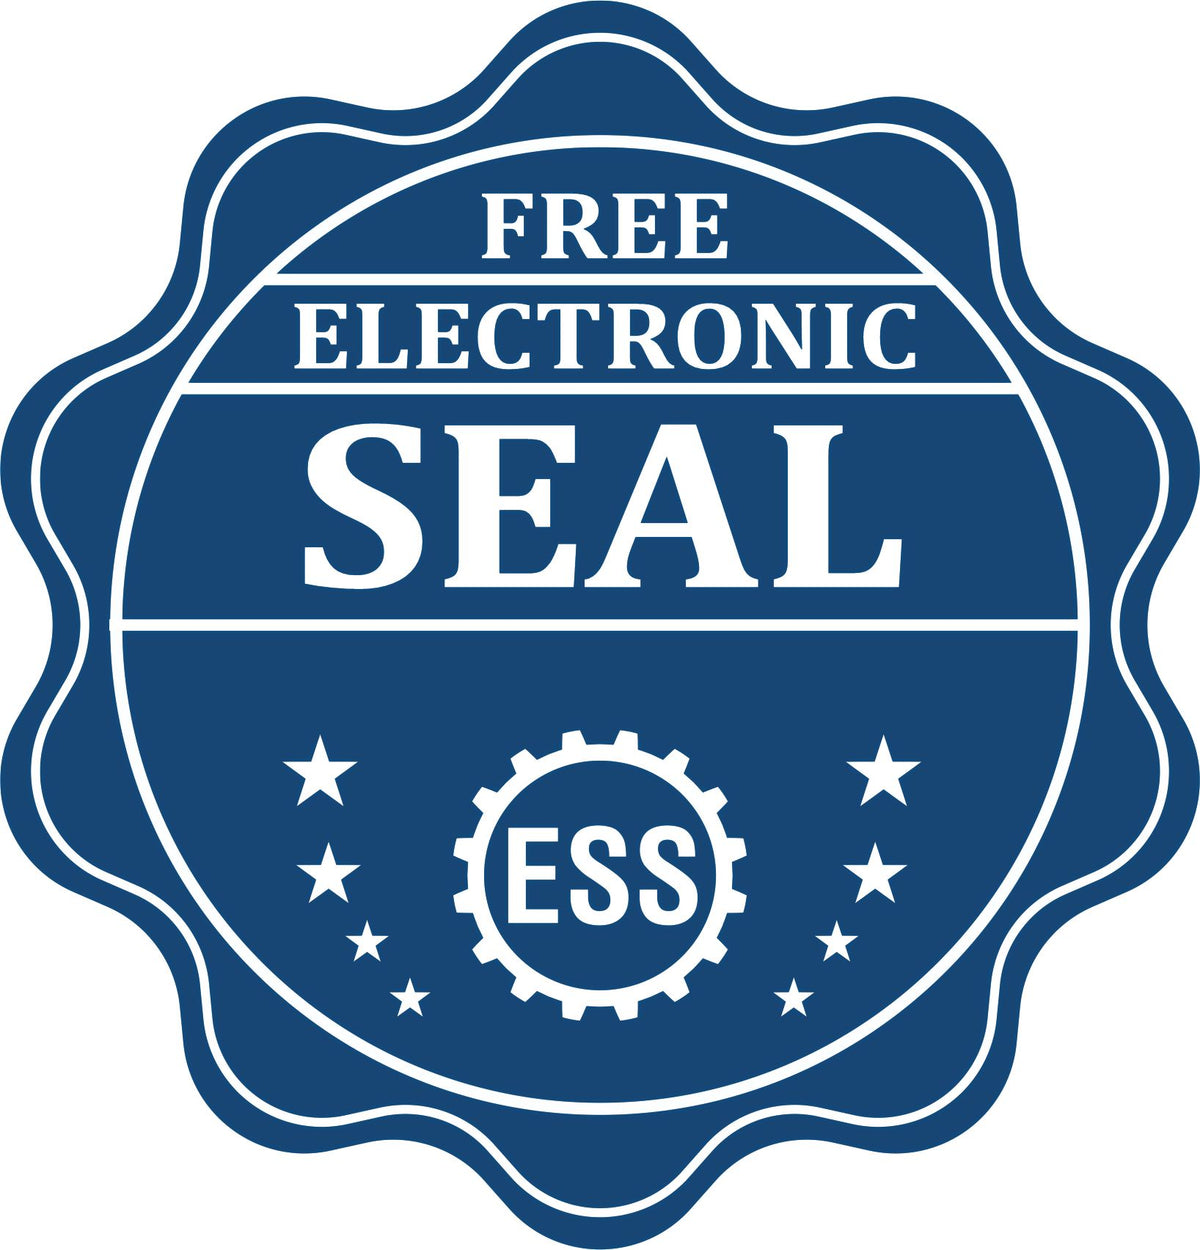 A badge showing a free electronic seal for the Hybrid Michigan Geologist Seal with stars and the ESS gear on the emblem.